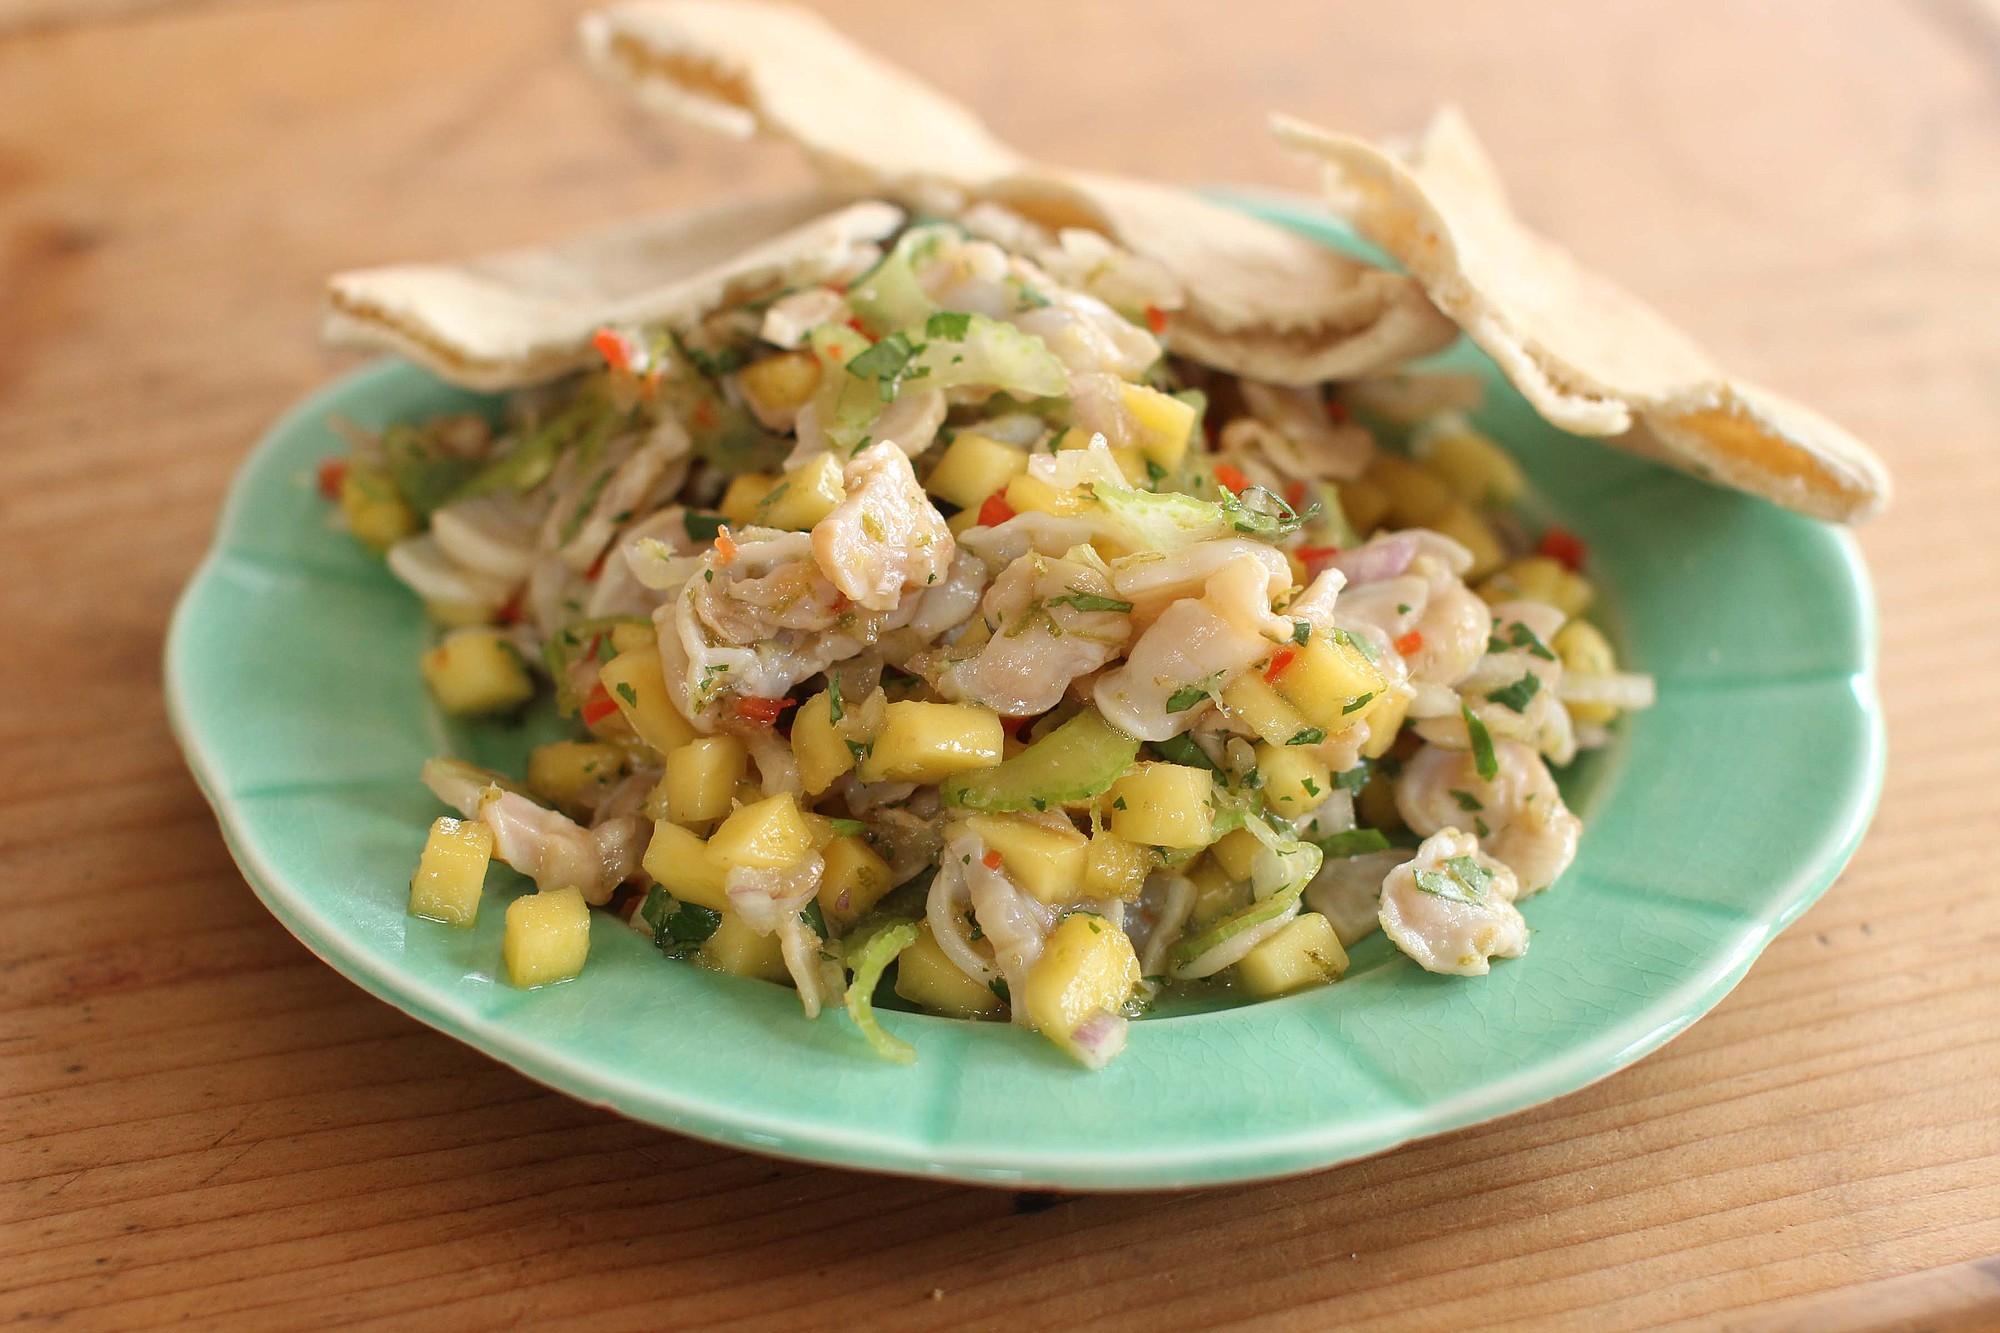 Geoduck salad, made from geoduck clams, greens, mango and chilis and served on pita bread .